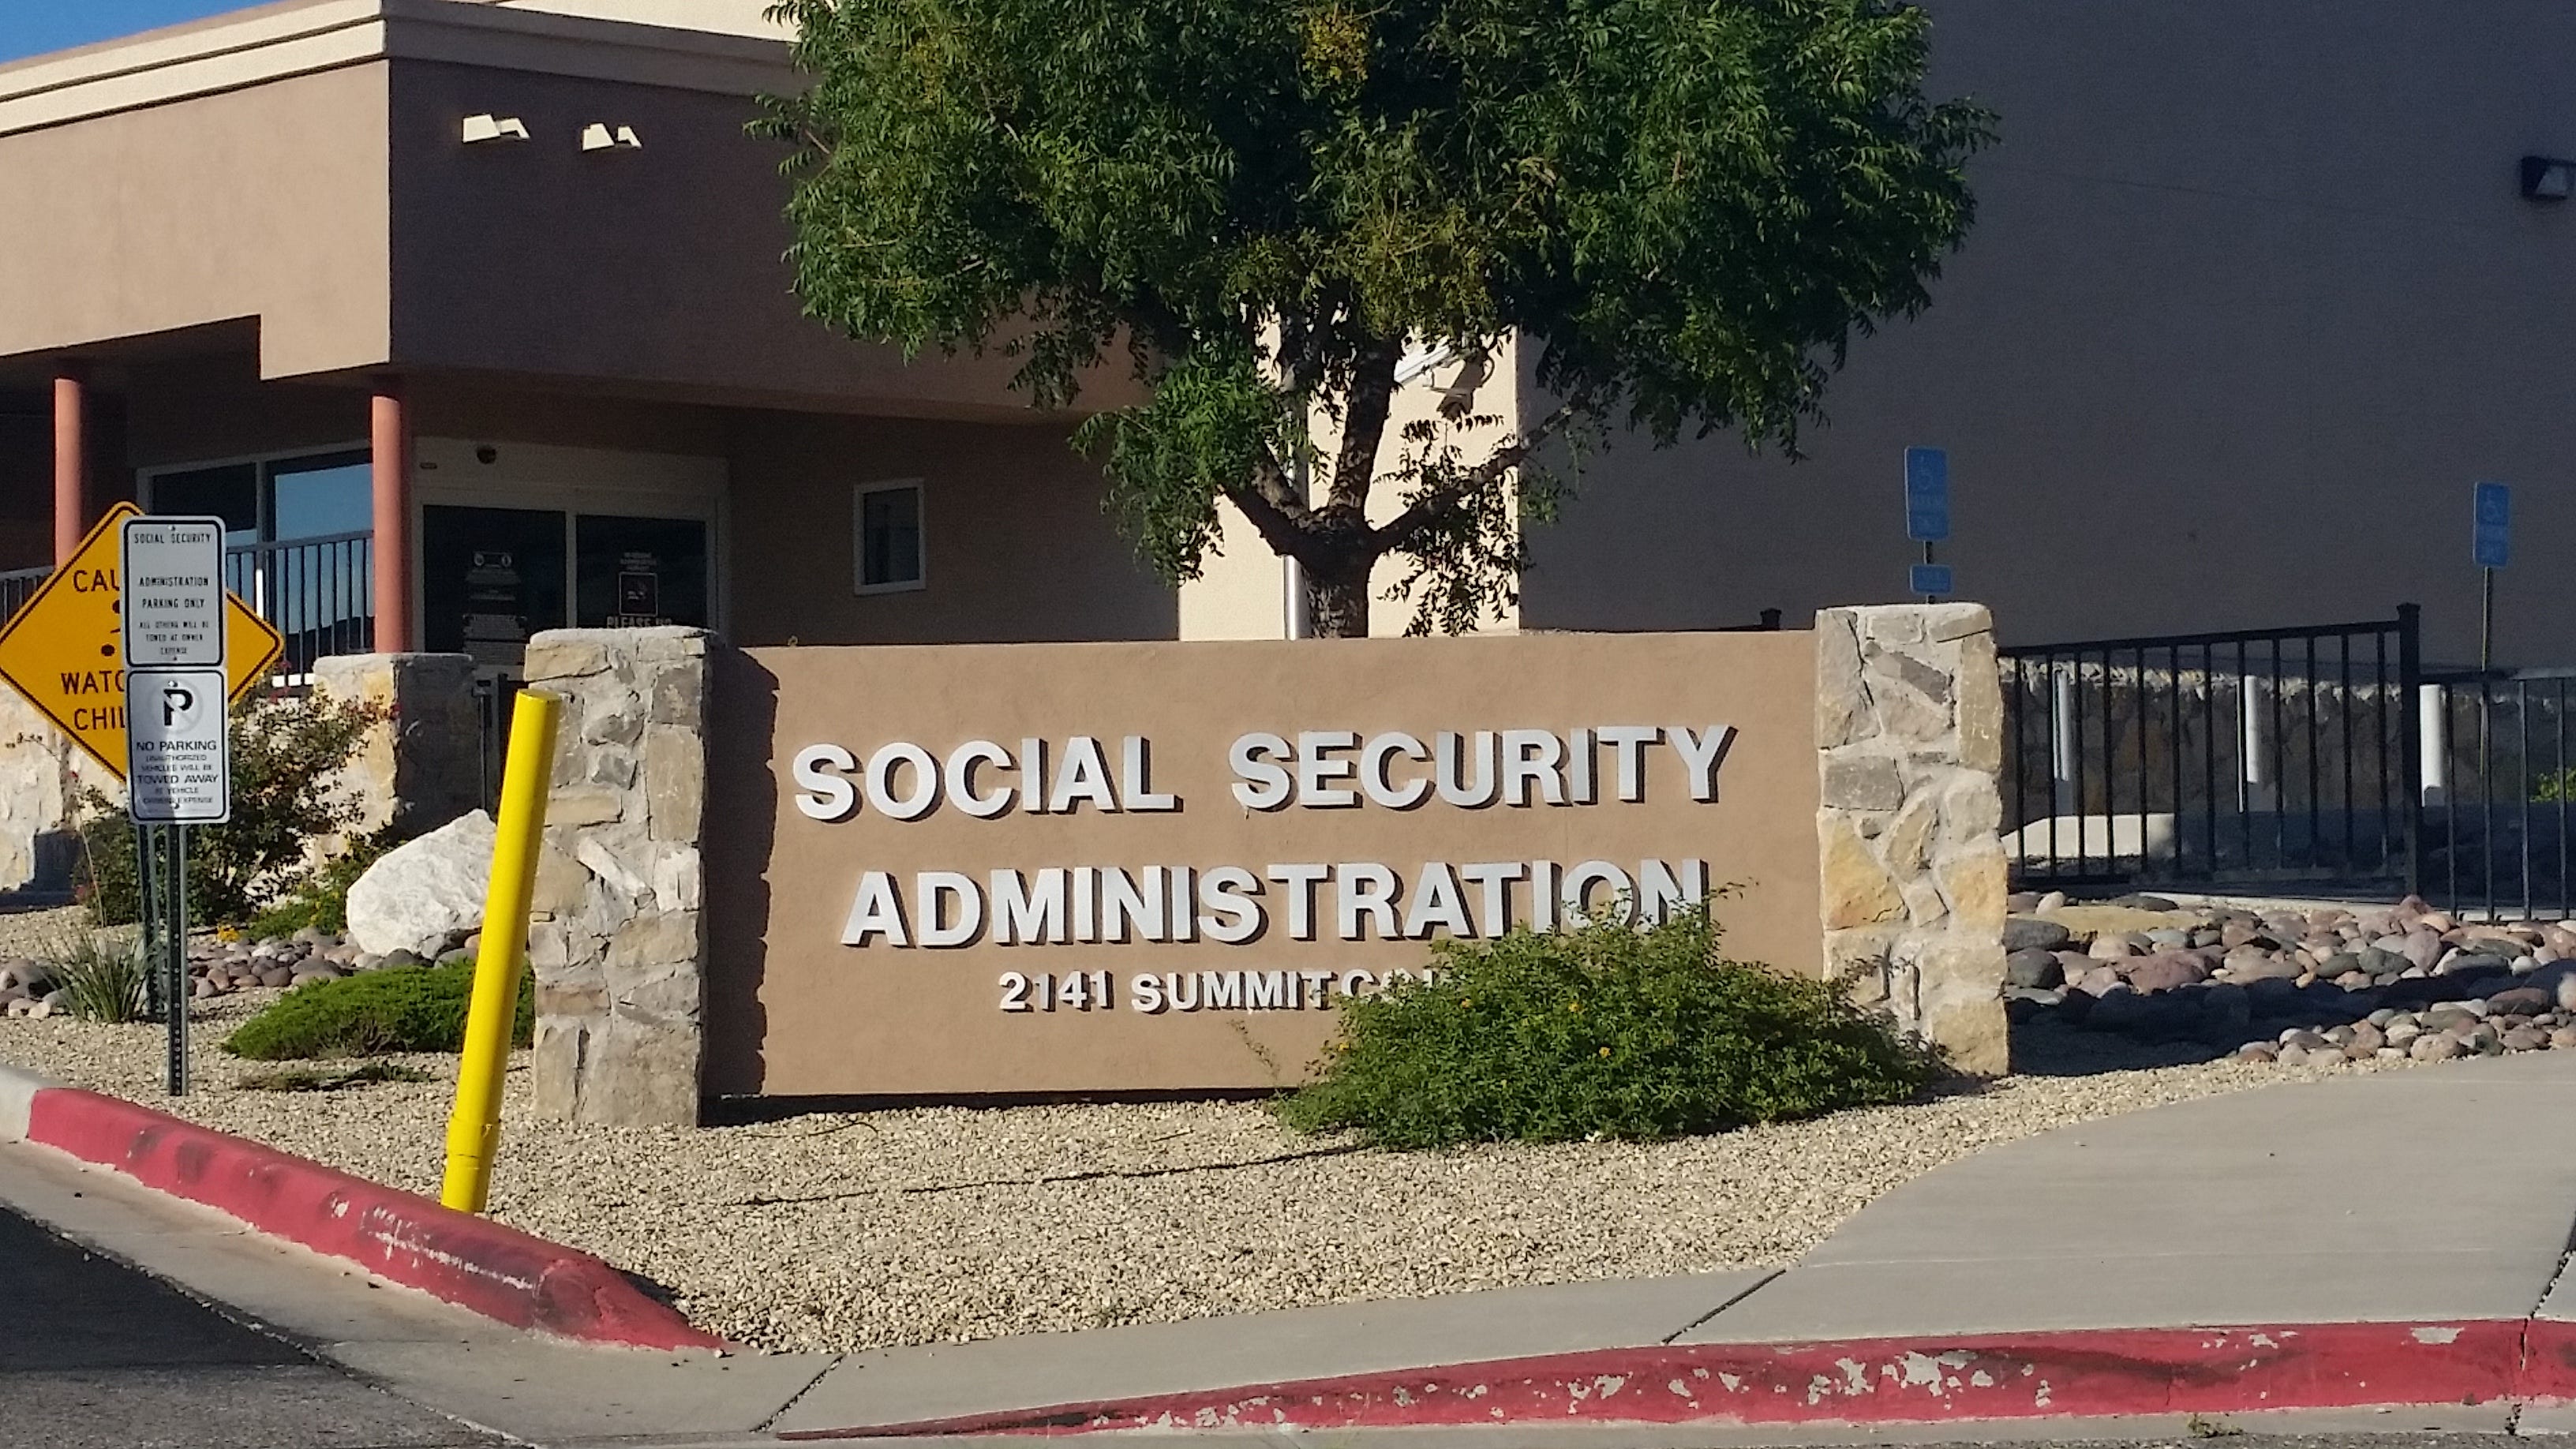 Social Security provides Spanish-language services